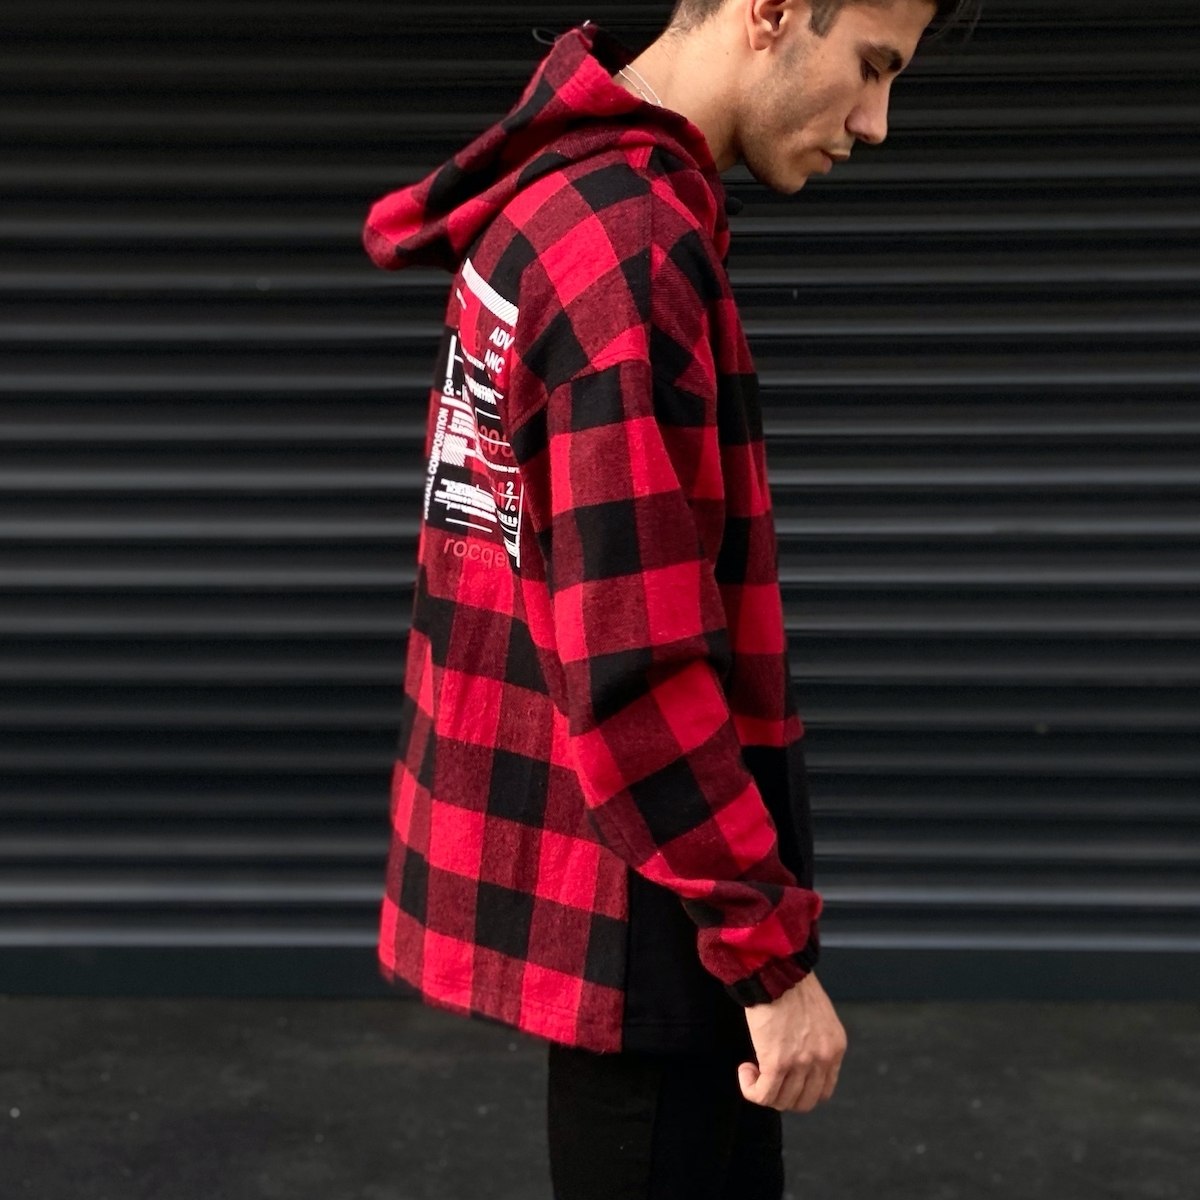 Men's Plaid Oversize Shirt With Pocket Detail In Black&Red - 4